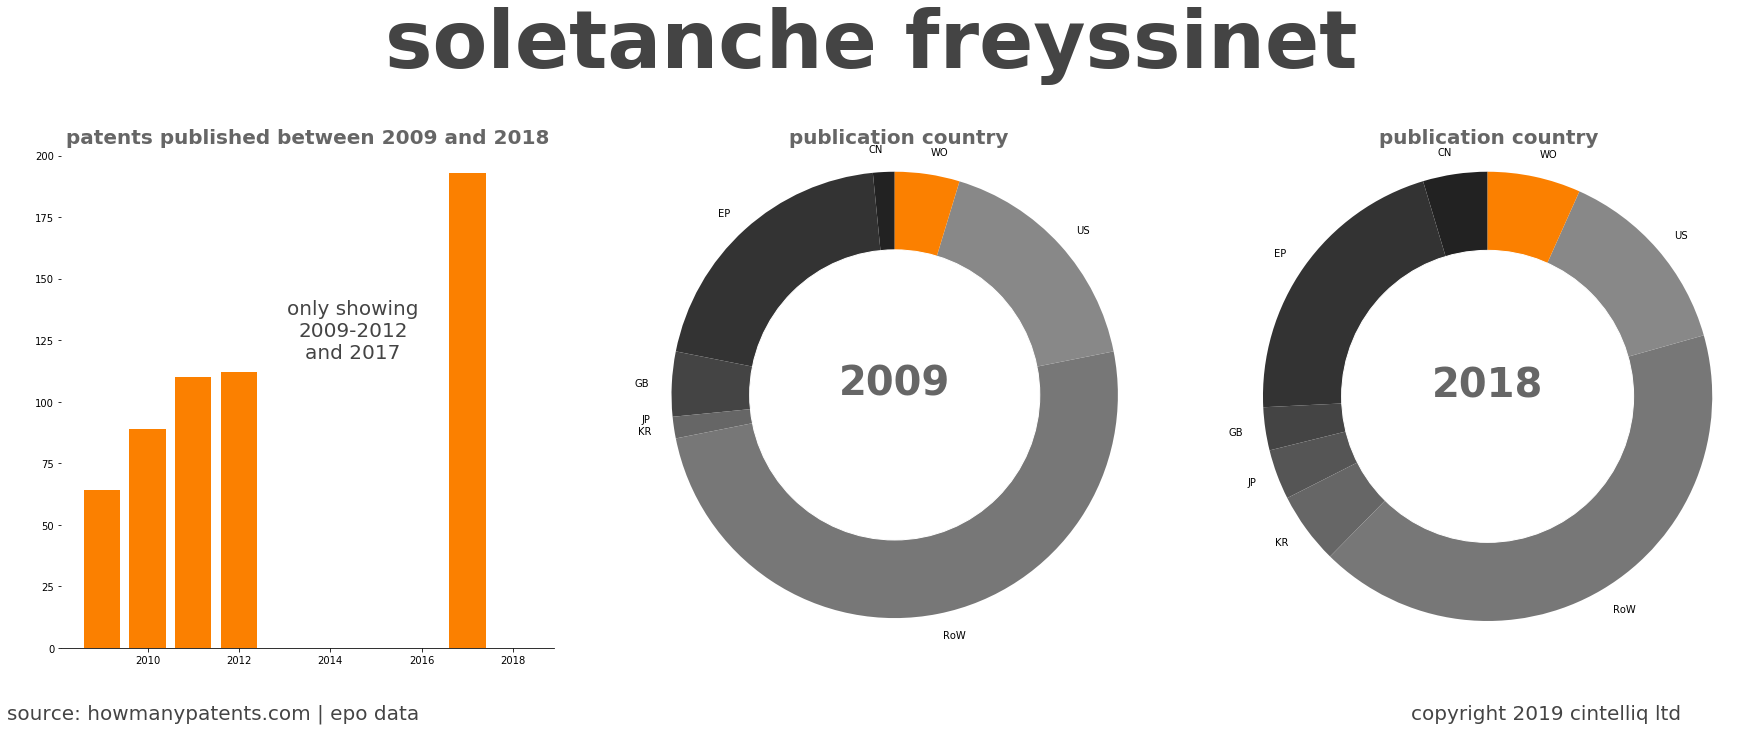 summary of patents for Soletanche Freyssinet